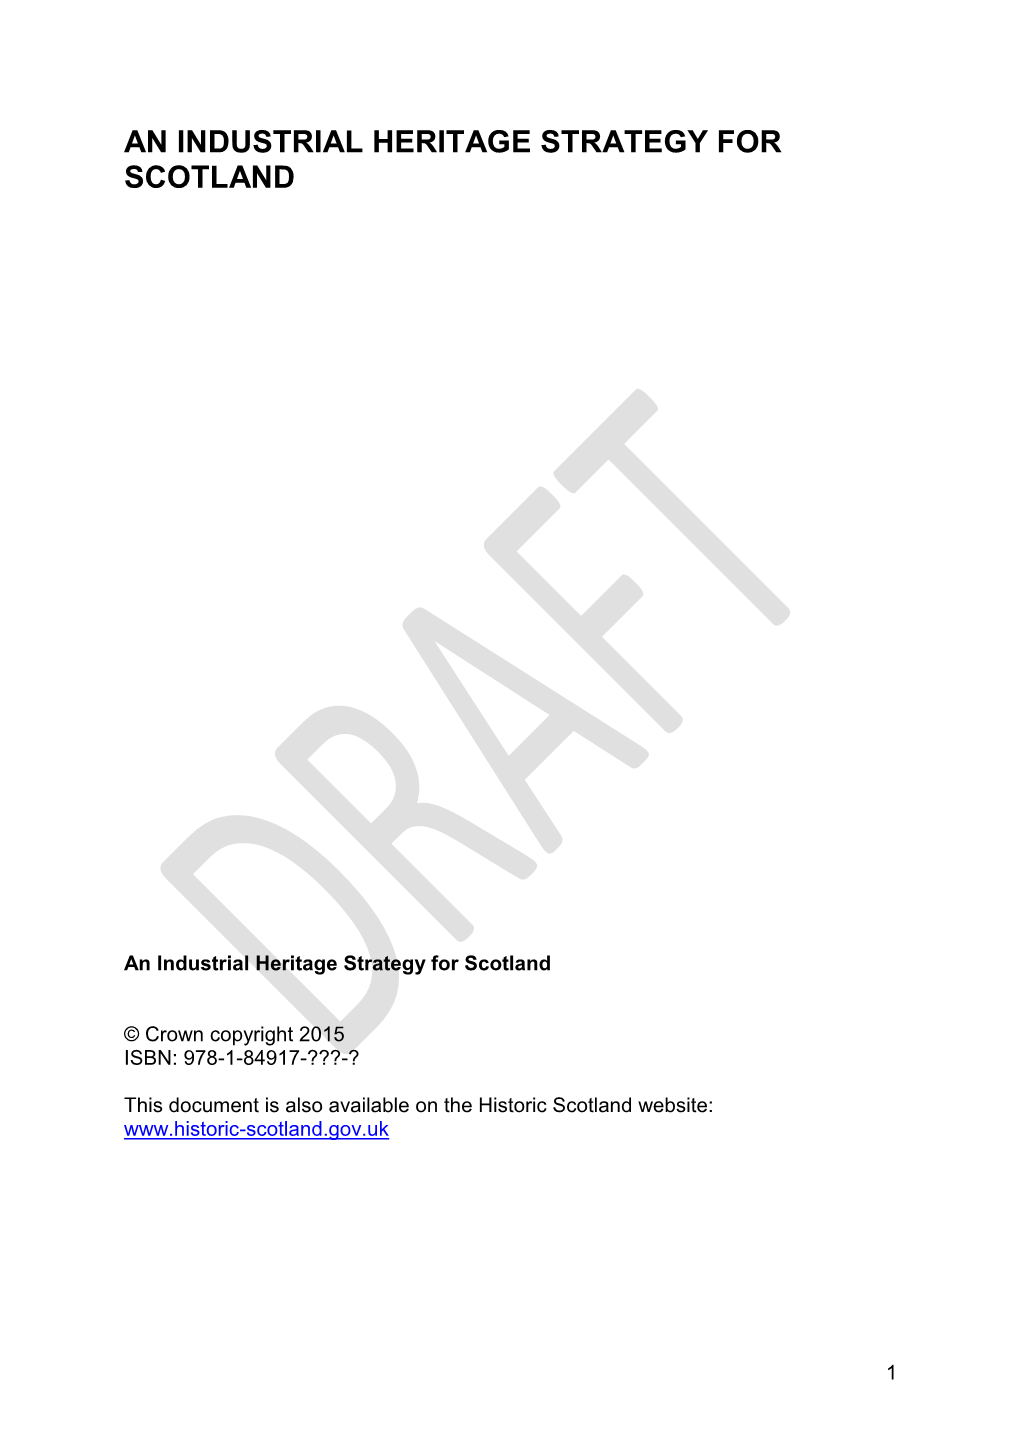 An Industrial Heritage Strategy for Scotland